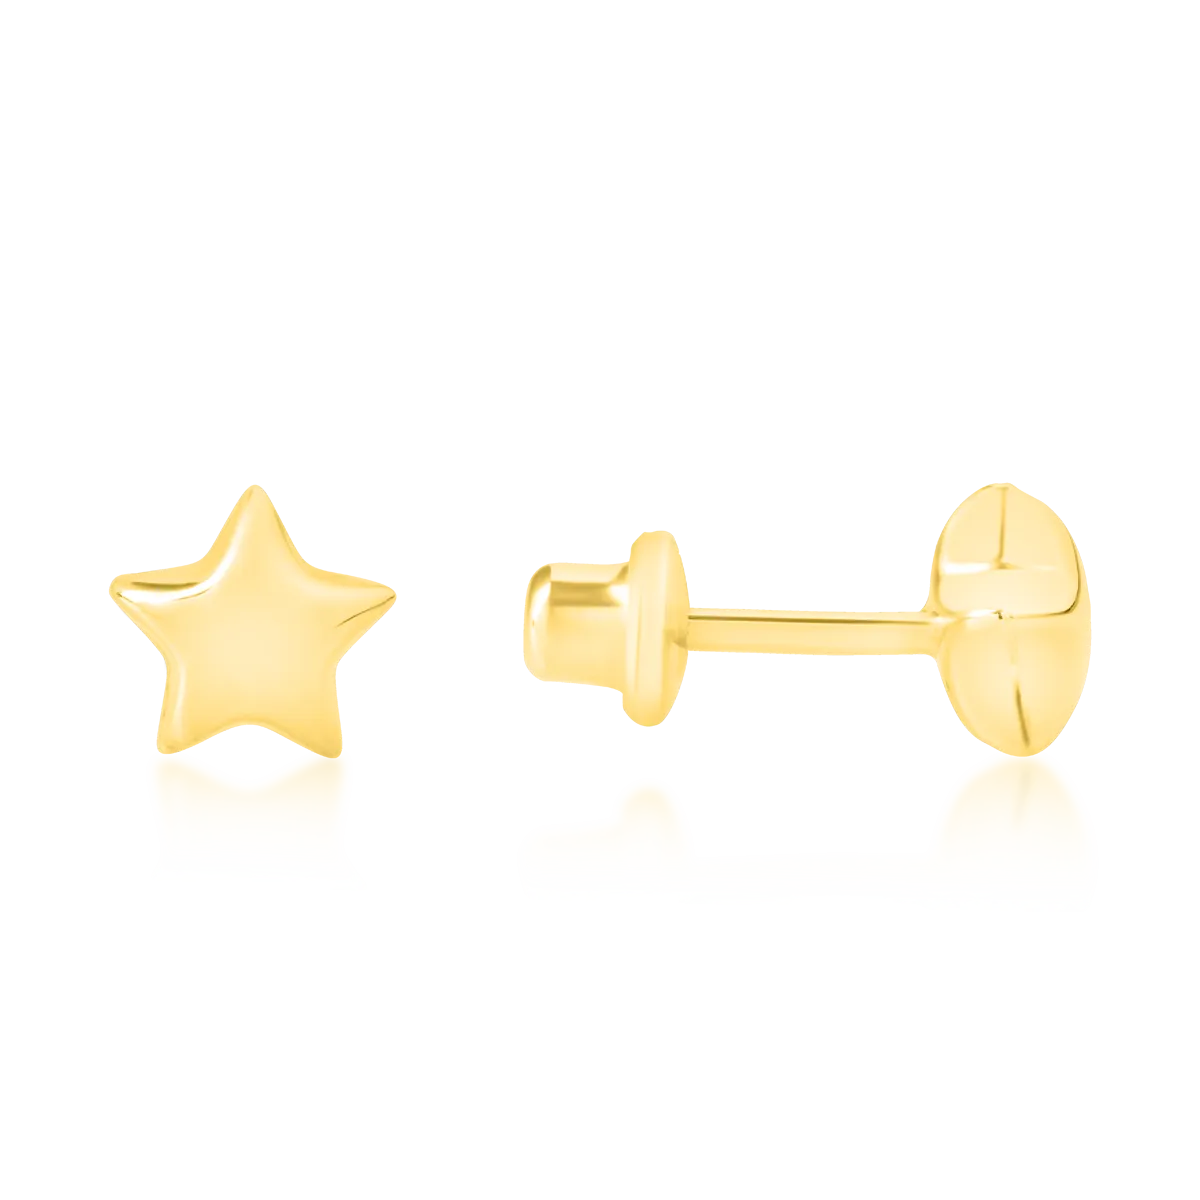 14K yellow gold children earrings with stars